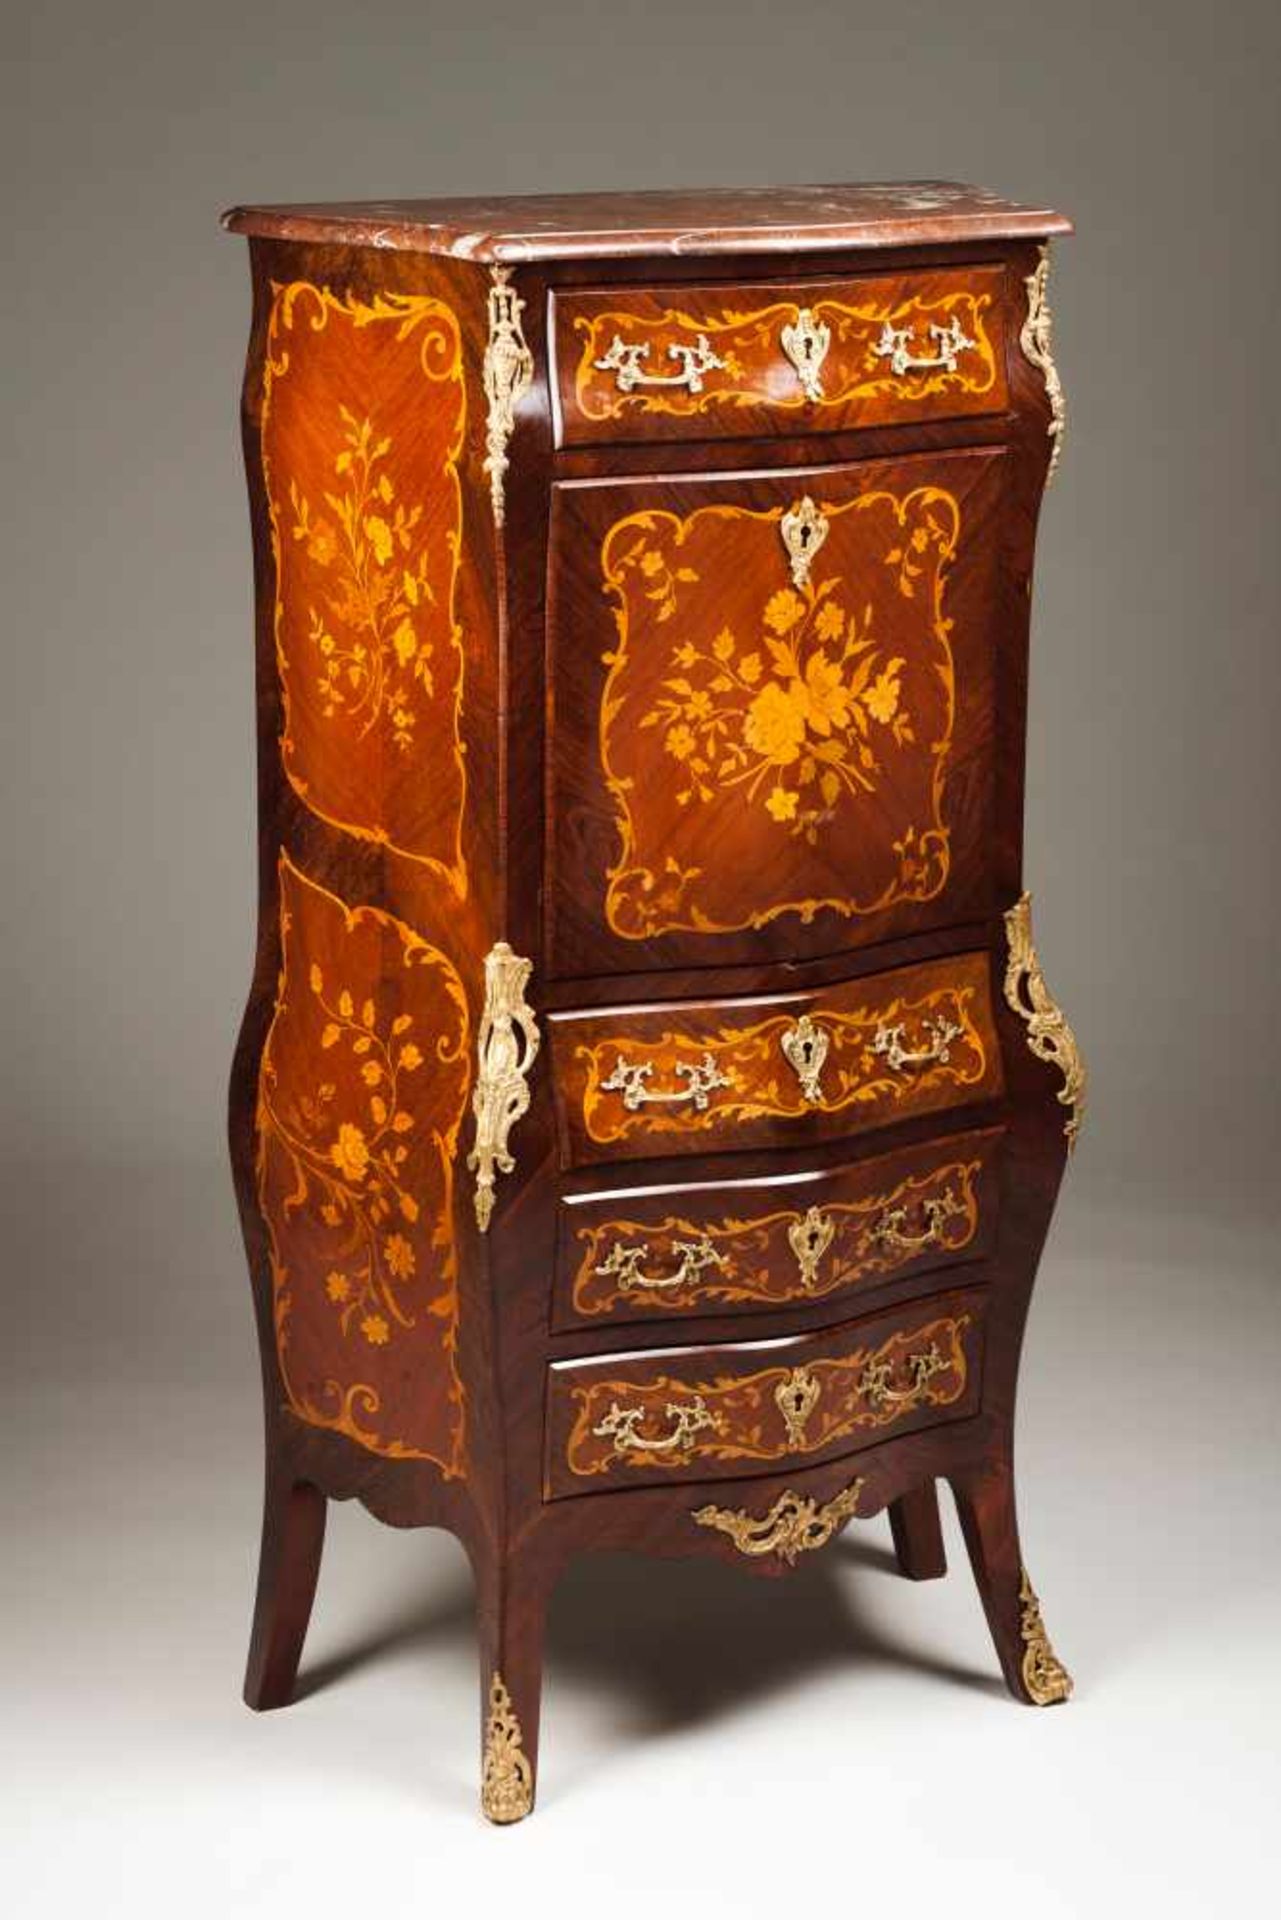 A Louis XV style secretaire à AbattantRosewood, kingwood, thornbush and satinwood marquetry